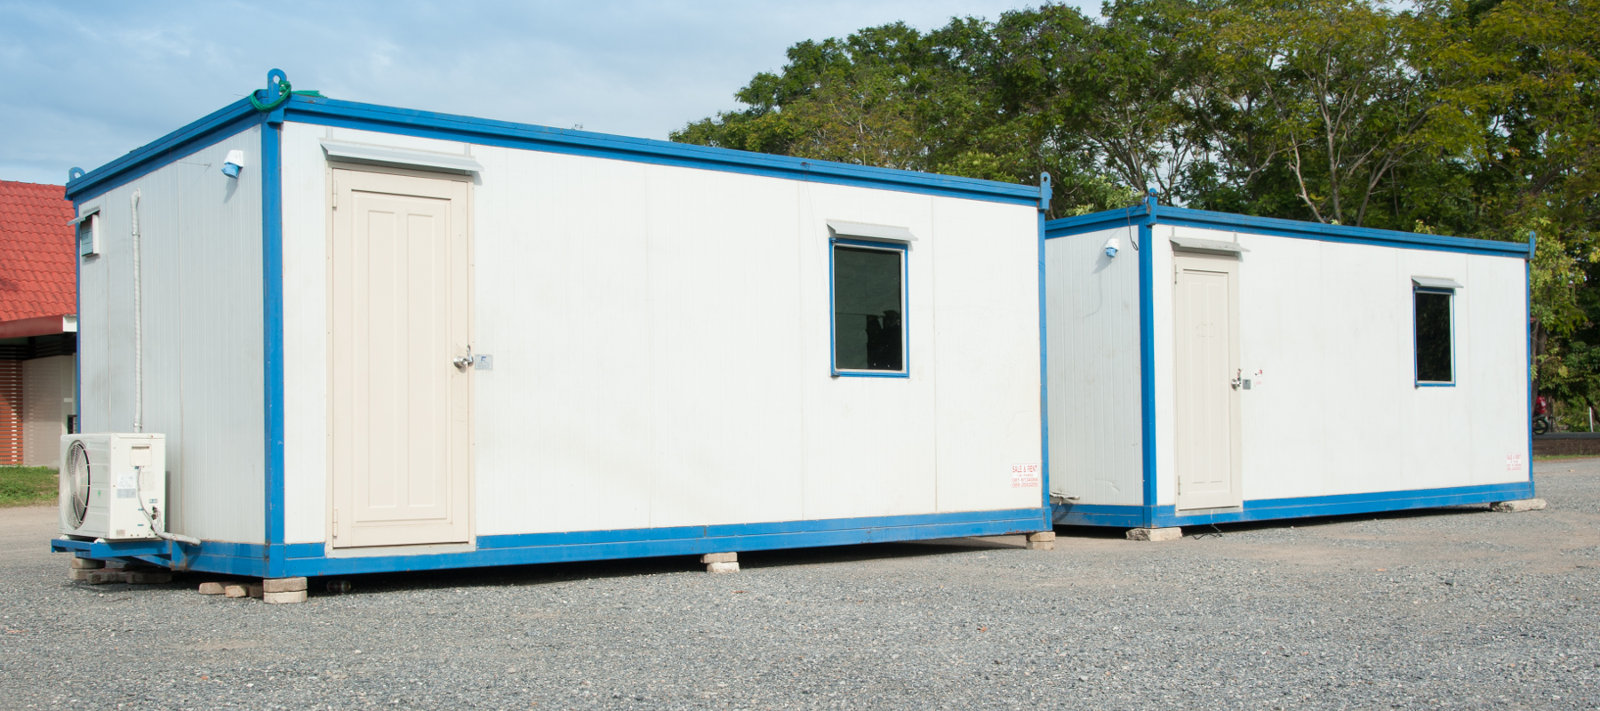 Mobile Office Trailers Get Prices On Mobile Office Trailers For Sale Lease And Rent